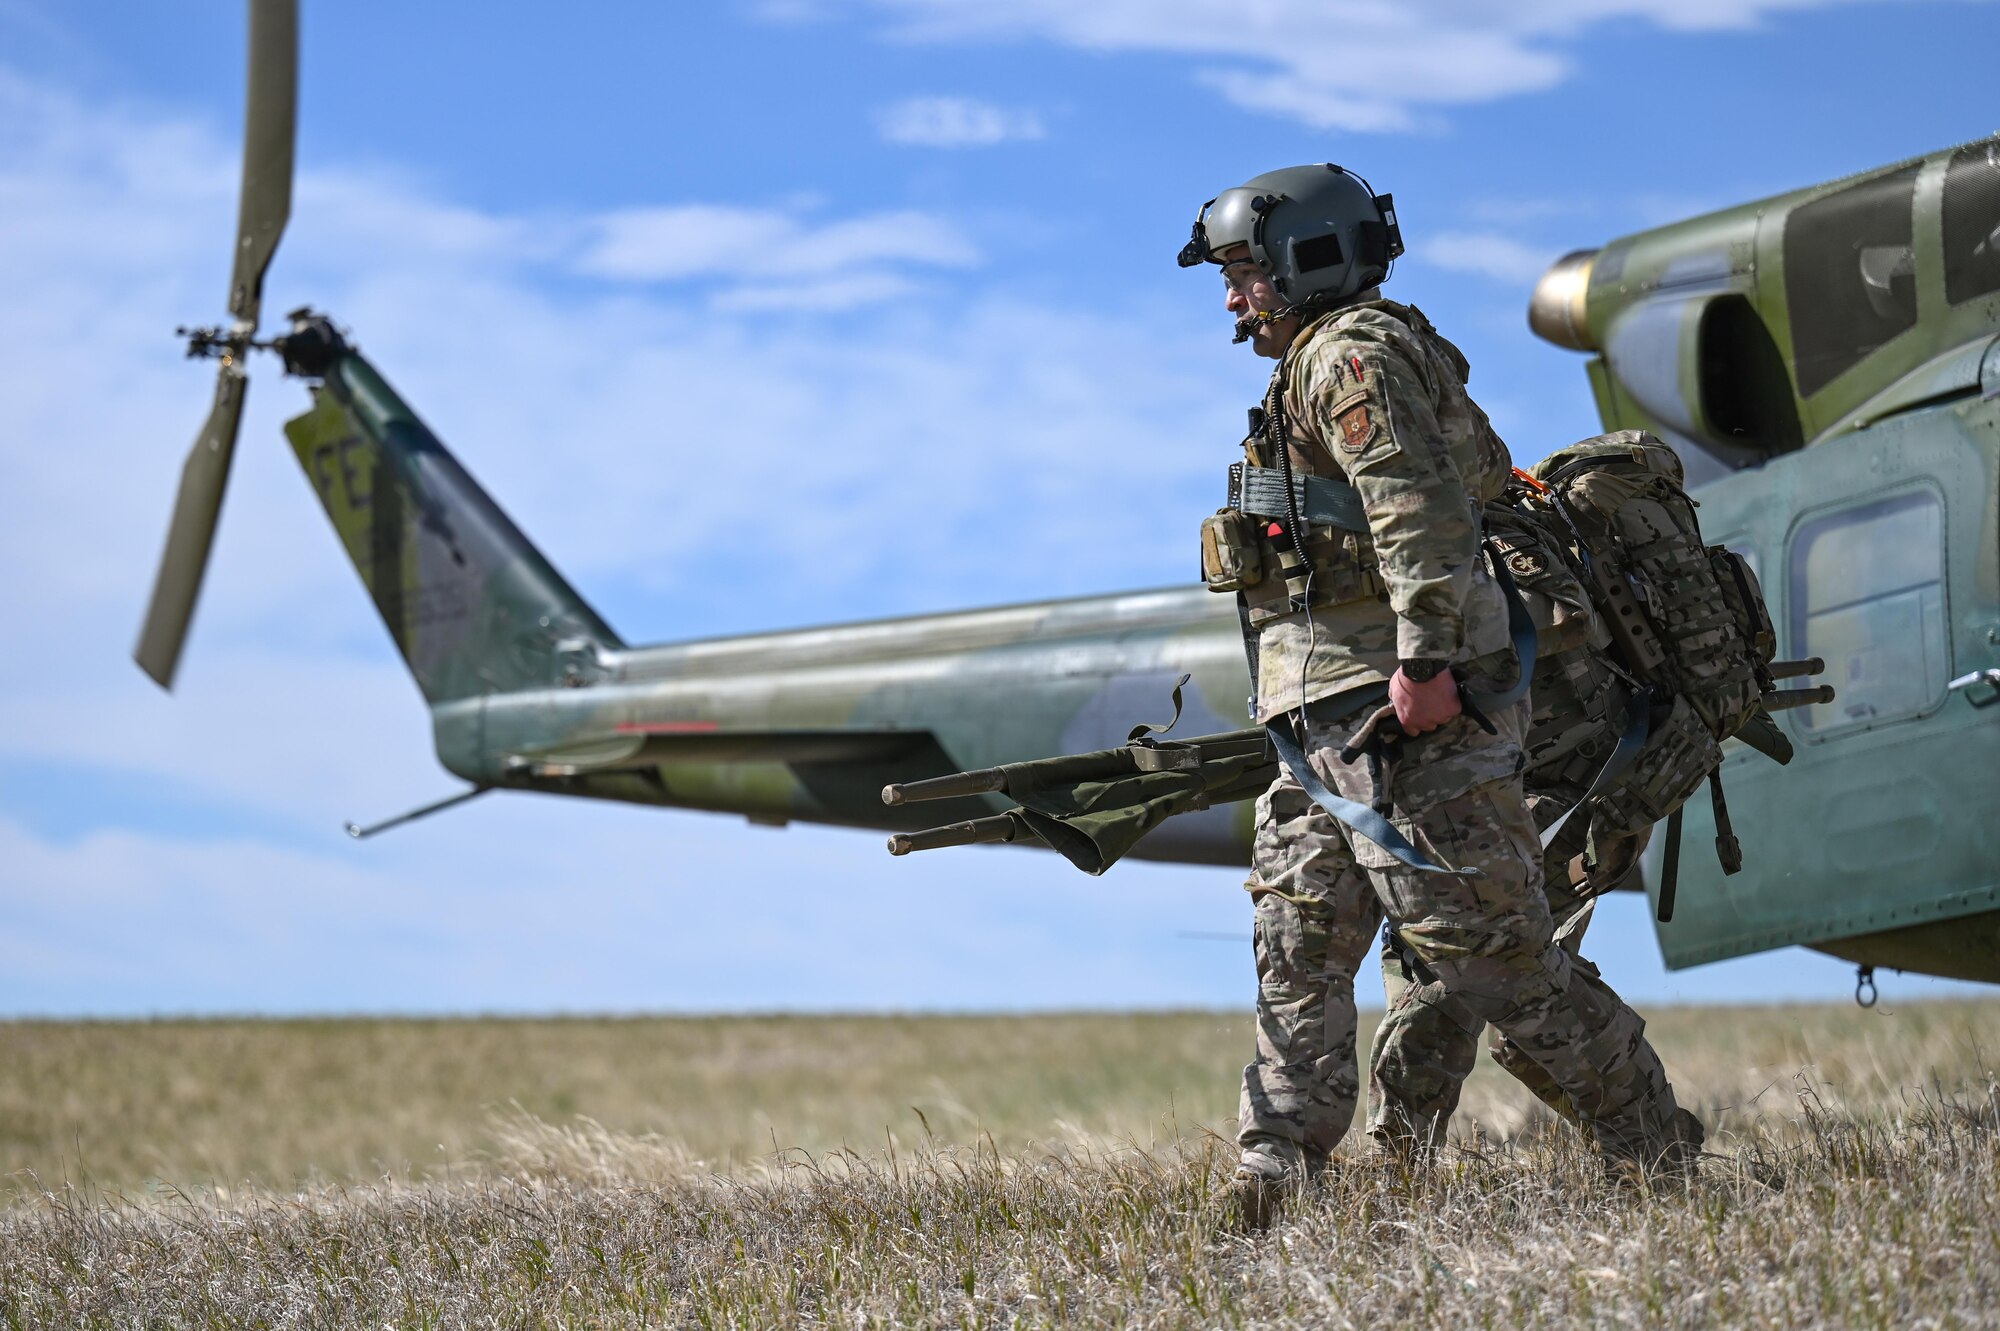 Aircrew of the 37th Helicopter Squadron depart a UH-1N Huey to bring injured to Cheyenne Regional Medical Center during the 2022 major accident response exercise, June 29, 2022, on F.E. Warren Air Force Base, Wyoming. Medical evacuation and transport is one of the several primary mission sets of the helicopter. (U.S. Air Force photo by Landon Gunsauls)